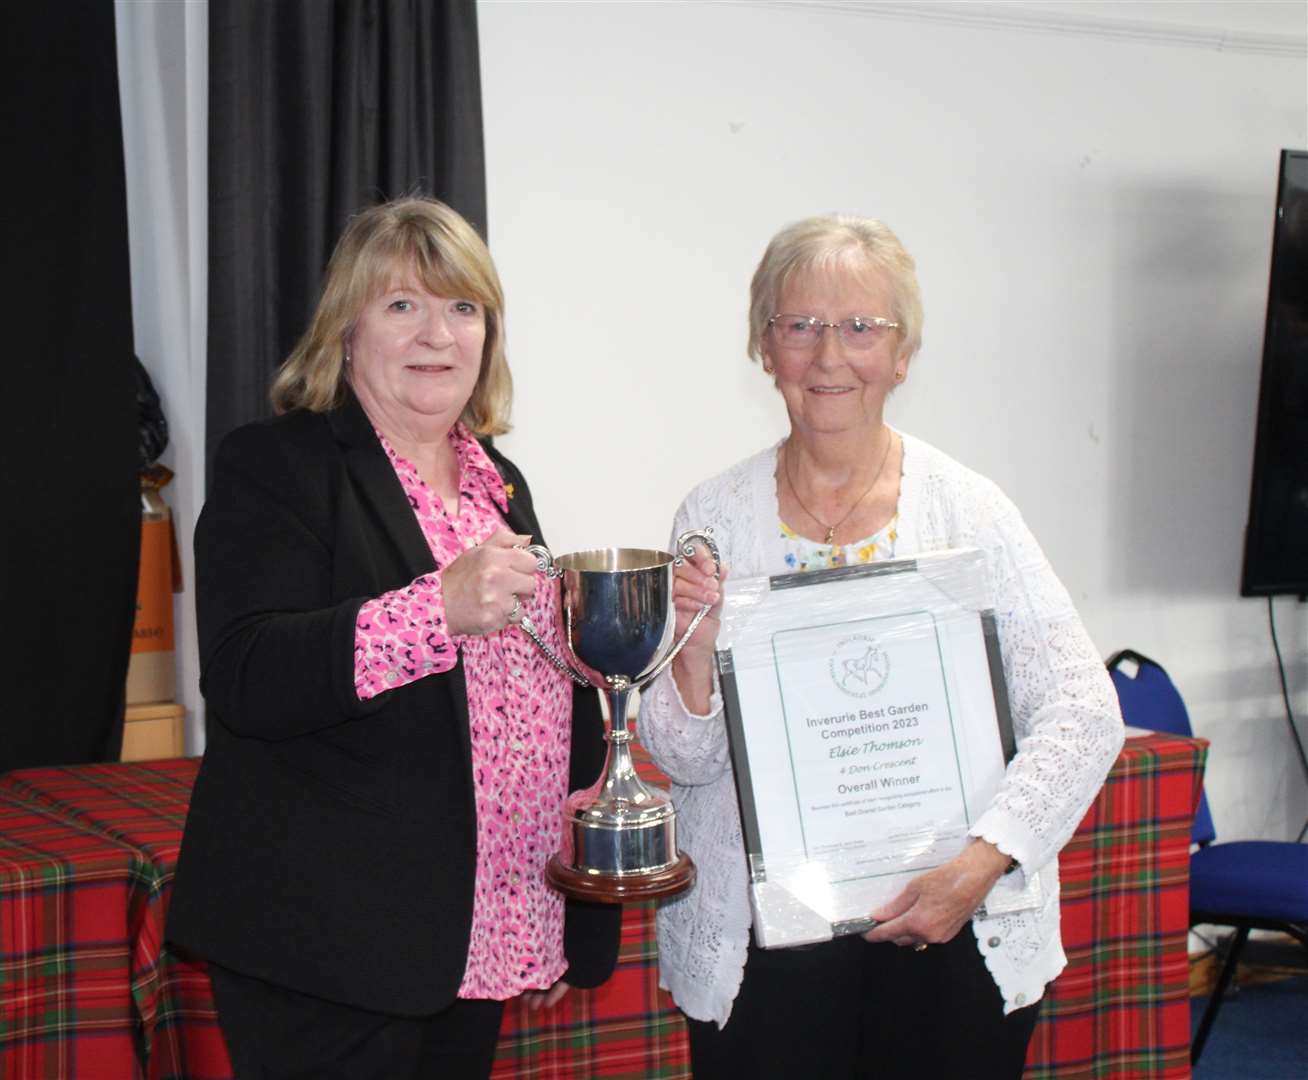 Overall winner Elsie Thomson receives her prize cup from Councillor Marion Ewenson at Saturday's IEI prize-giving at Garioch Heritage centre, Loco works road, Inverurie. Picture: Griselda McGregor